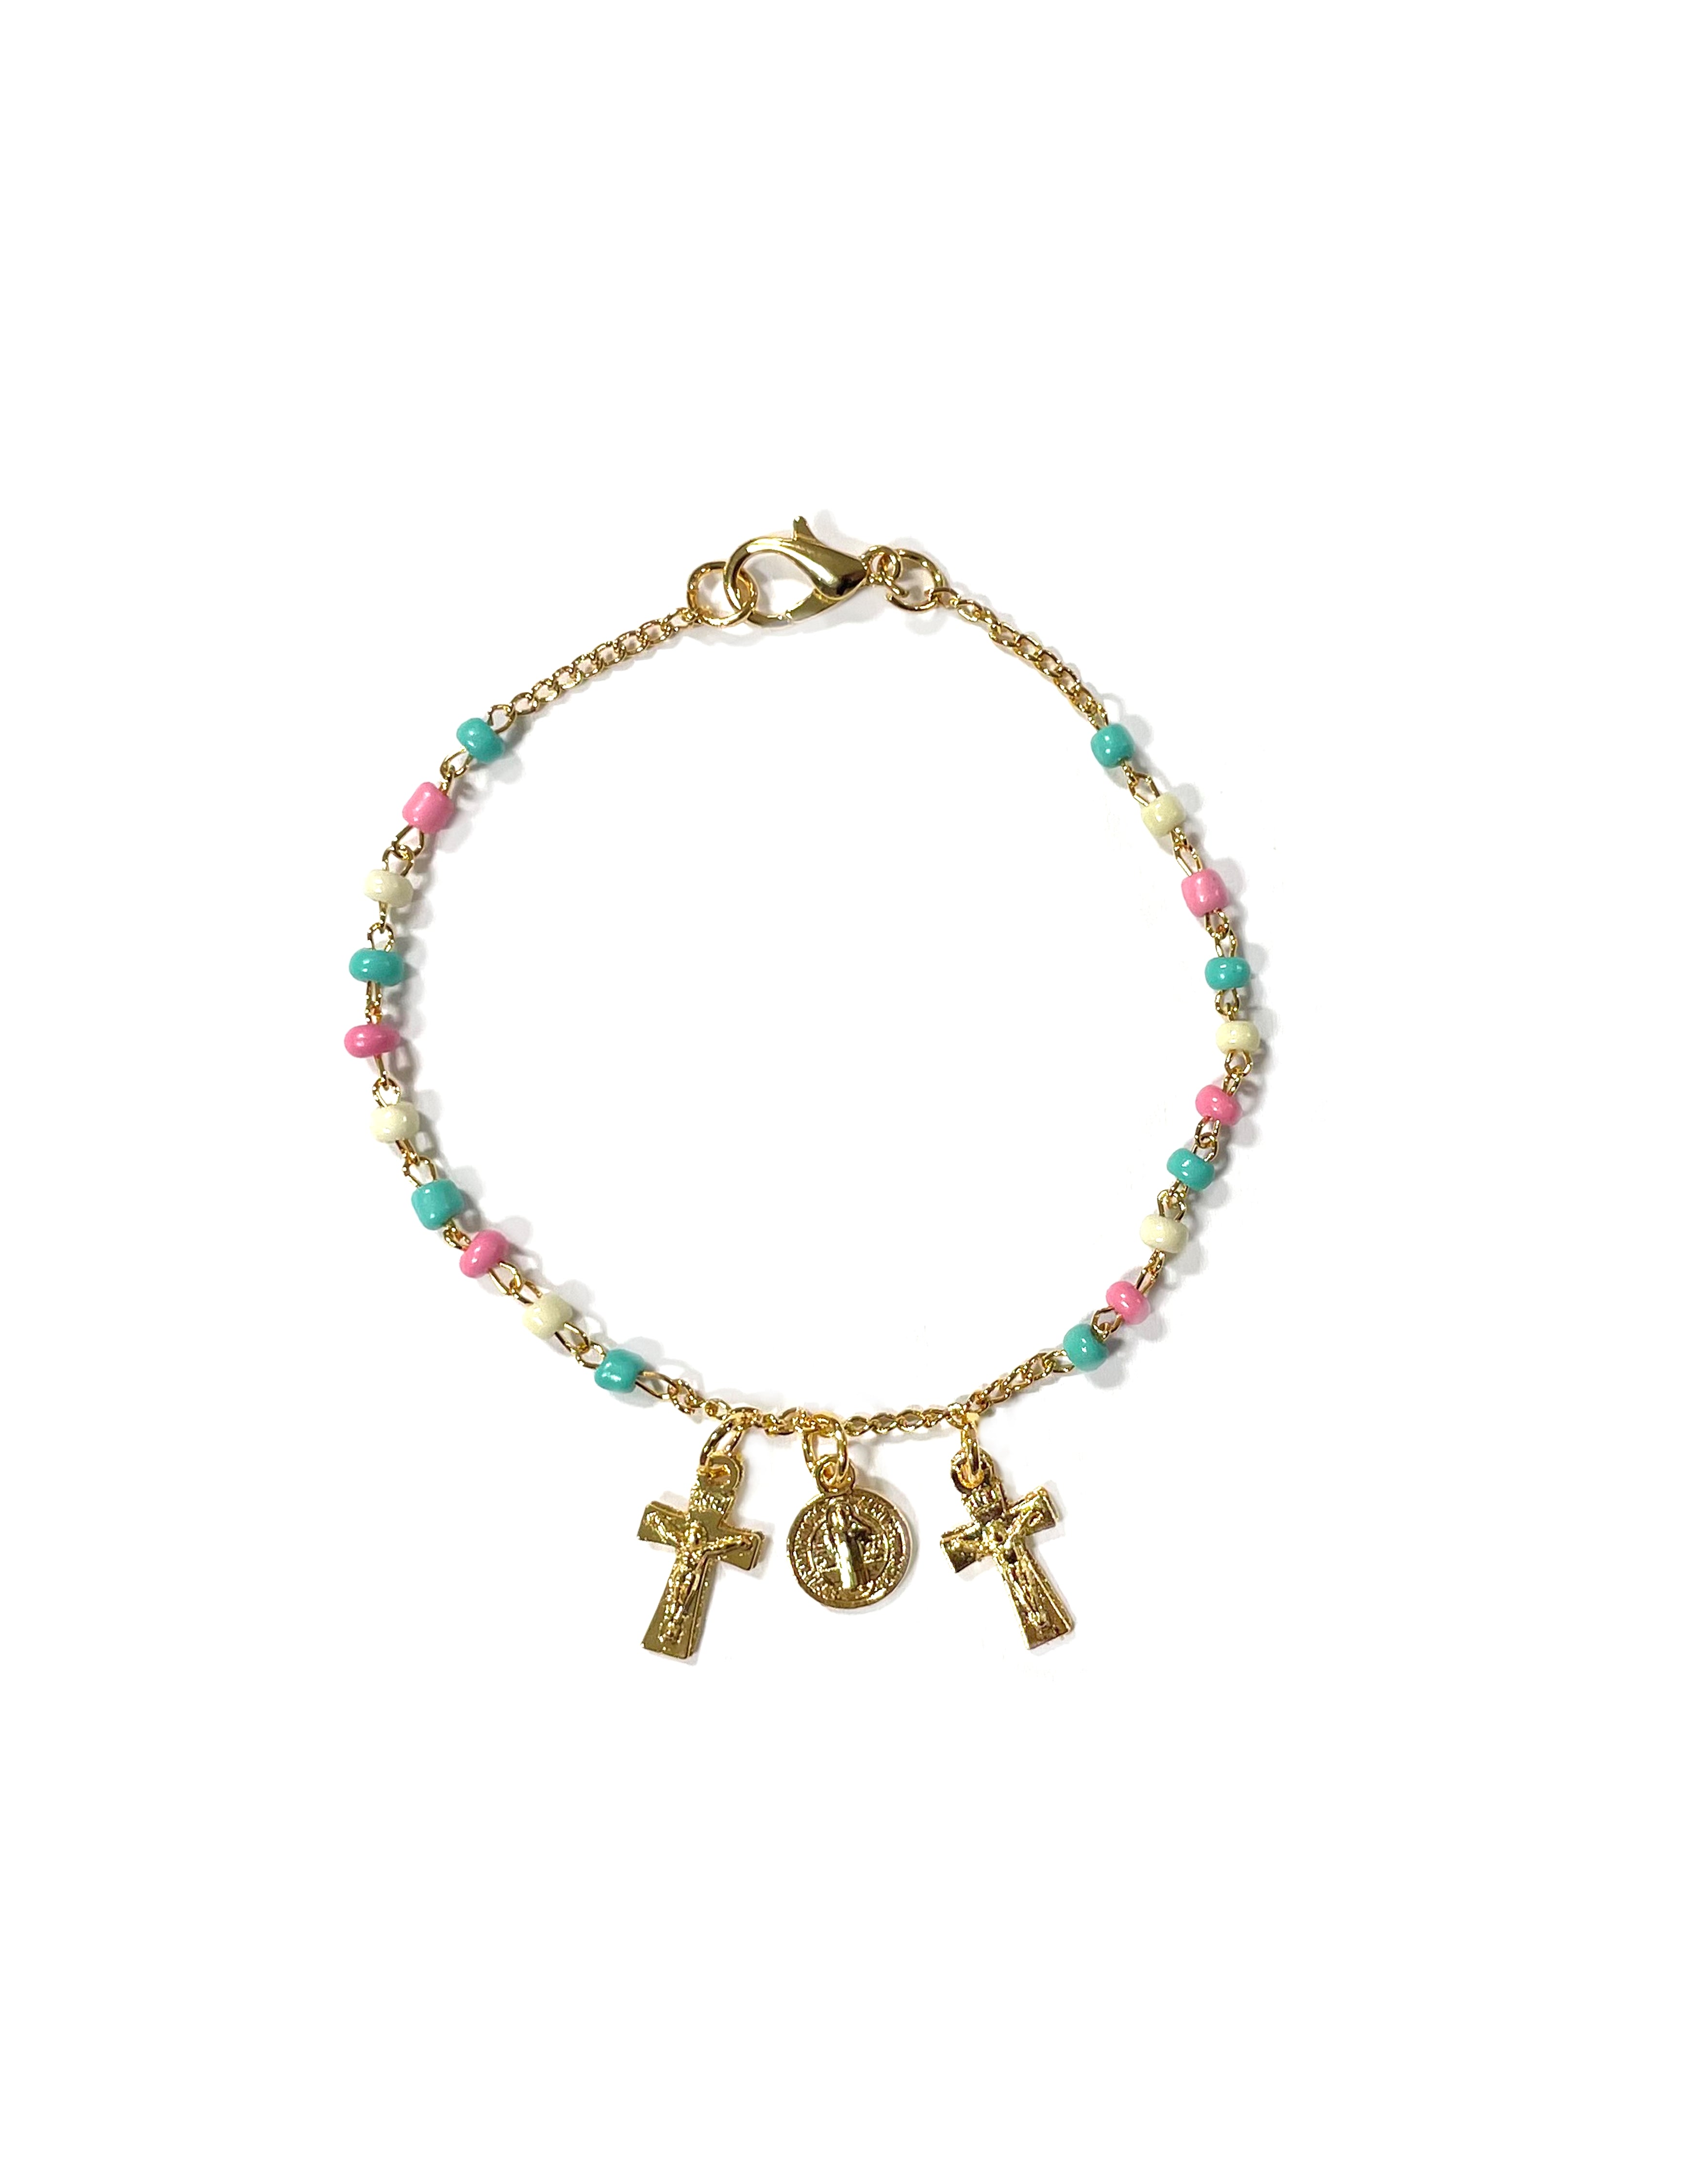 Golden and colored beads bracelet with Saint Benedict medal and small crosses